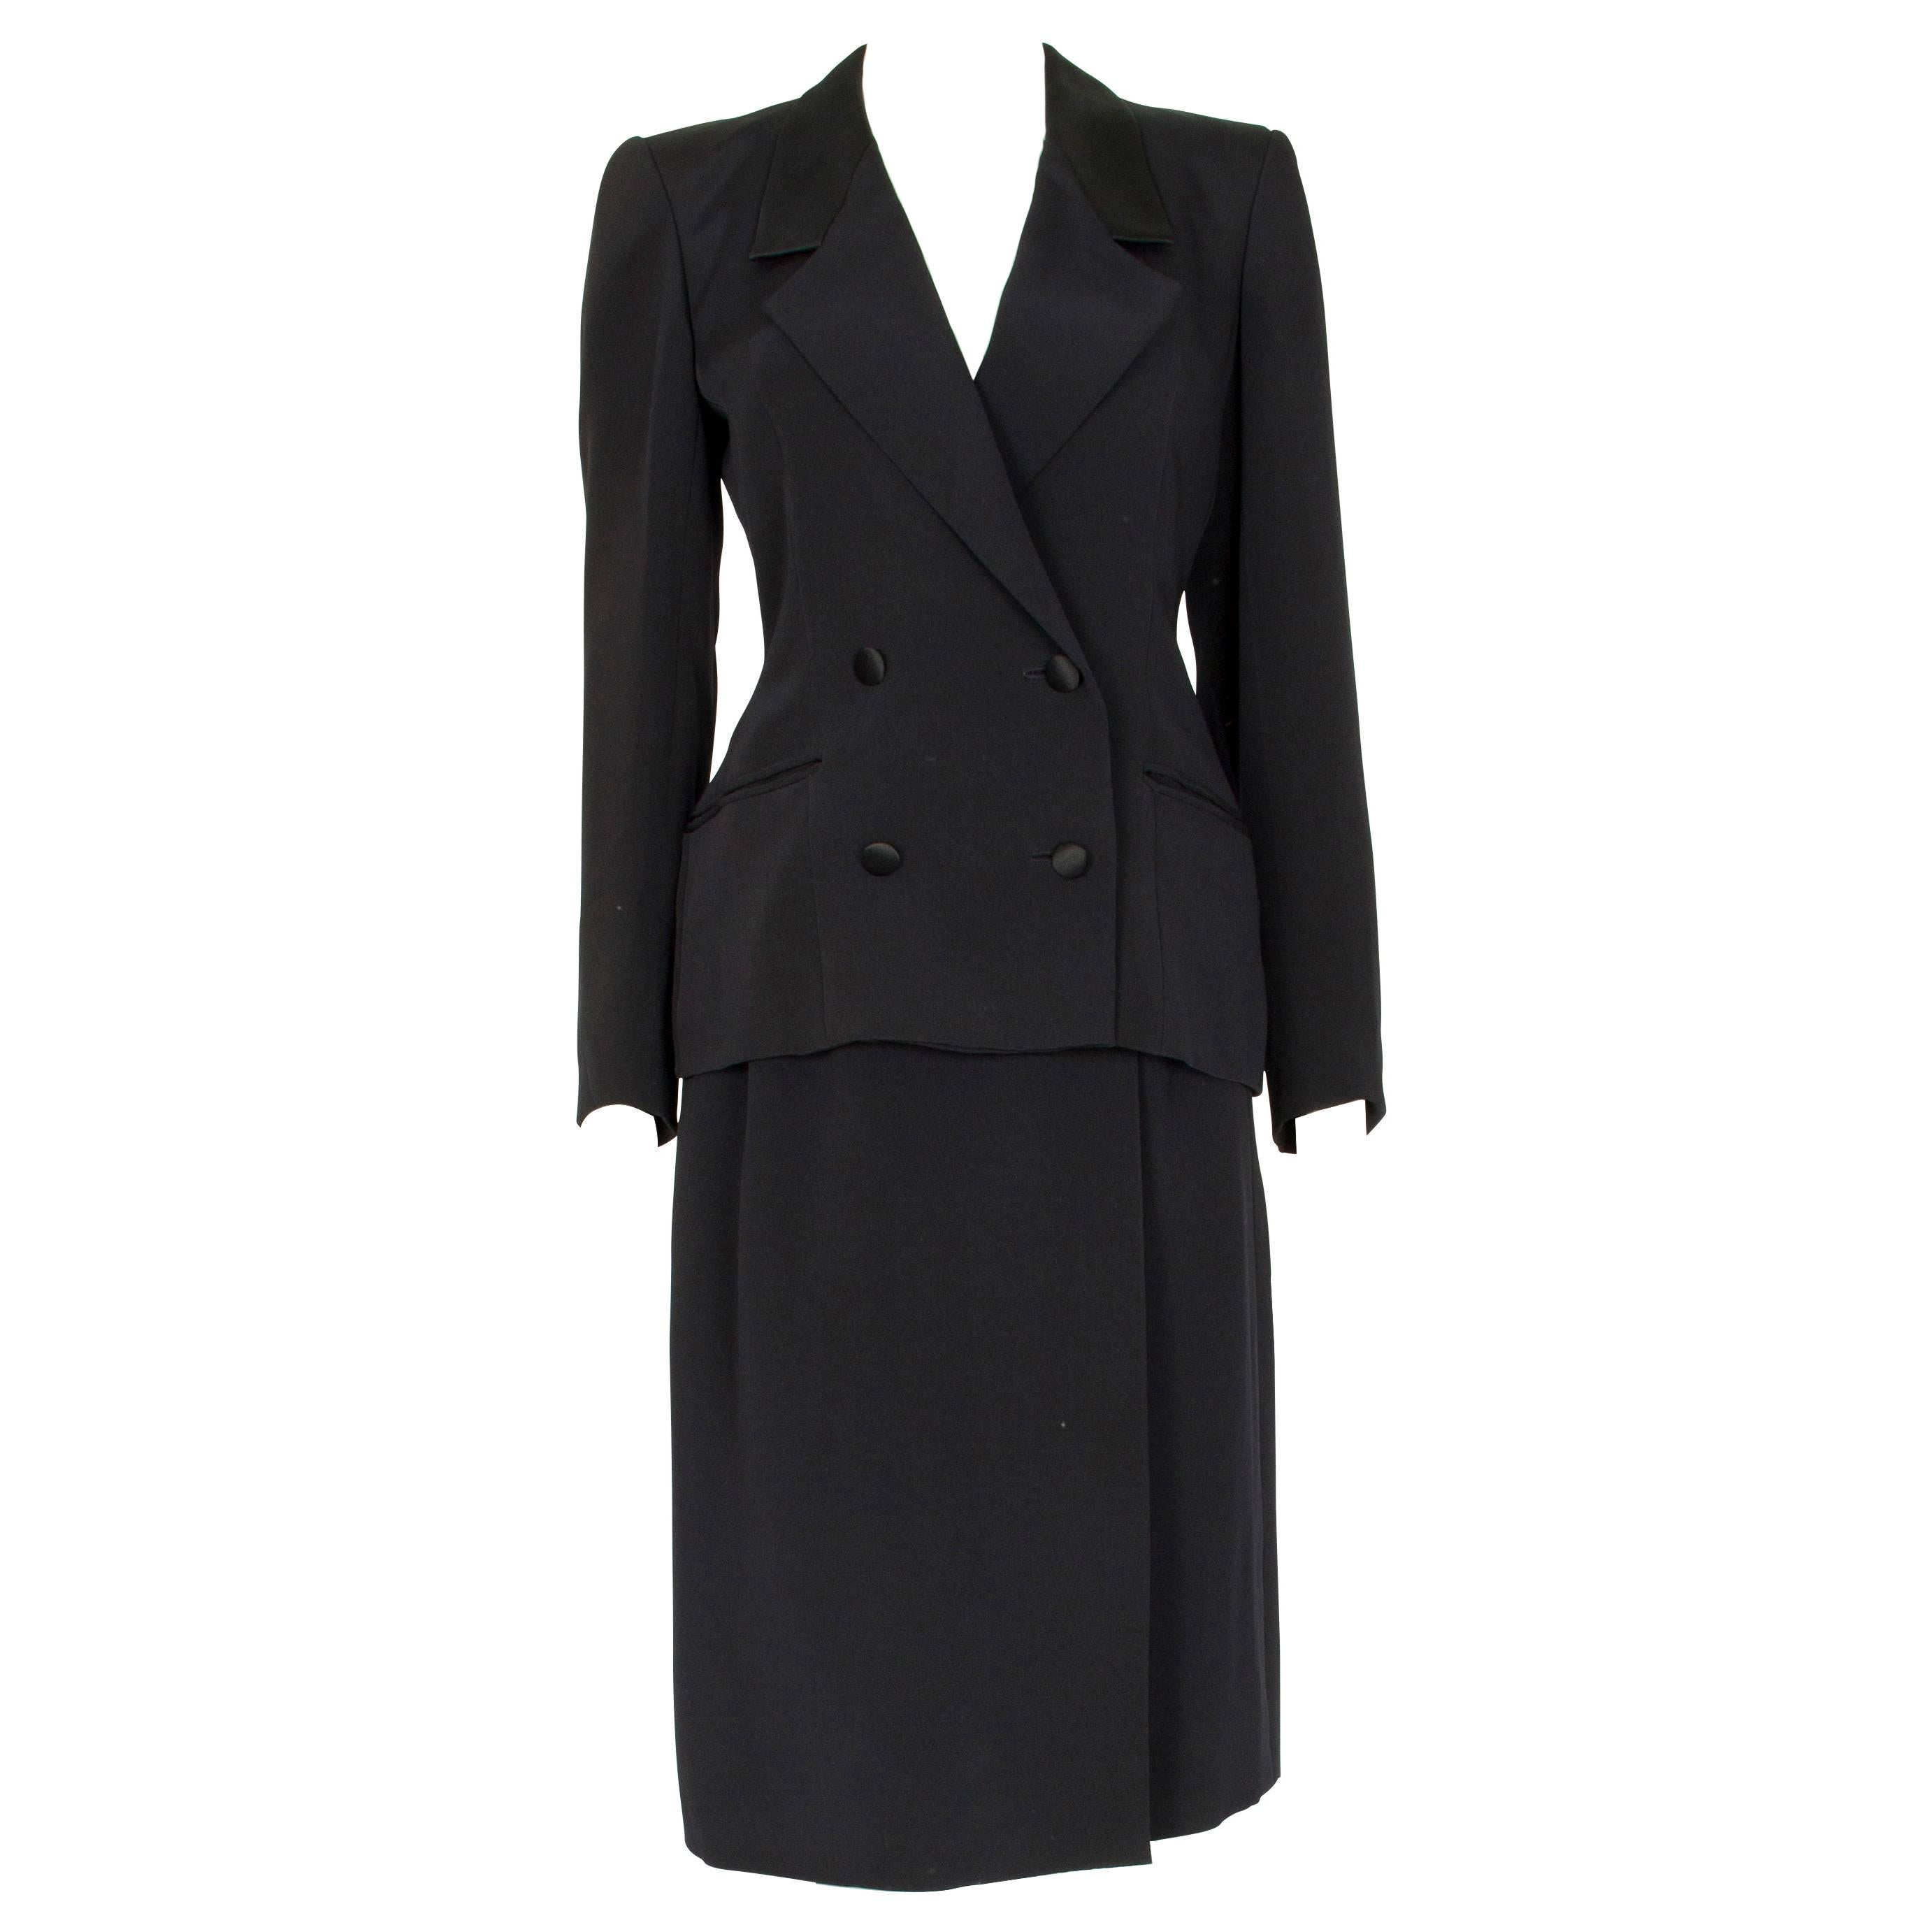 A/W 1980 Dior Couture Navy Silk Satin Double Breasted Jacket & Wrap Skirt Suit For Sale